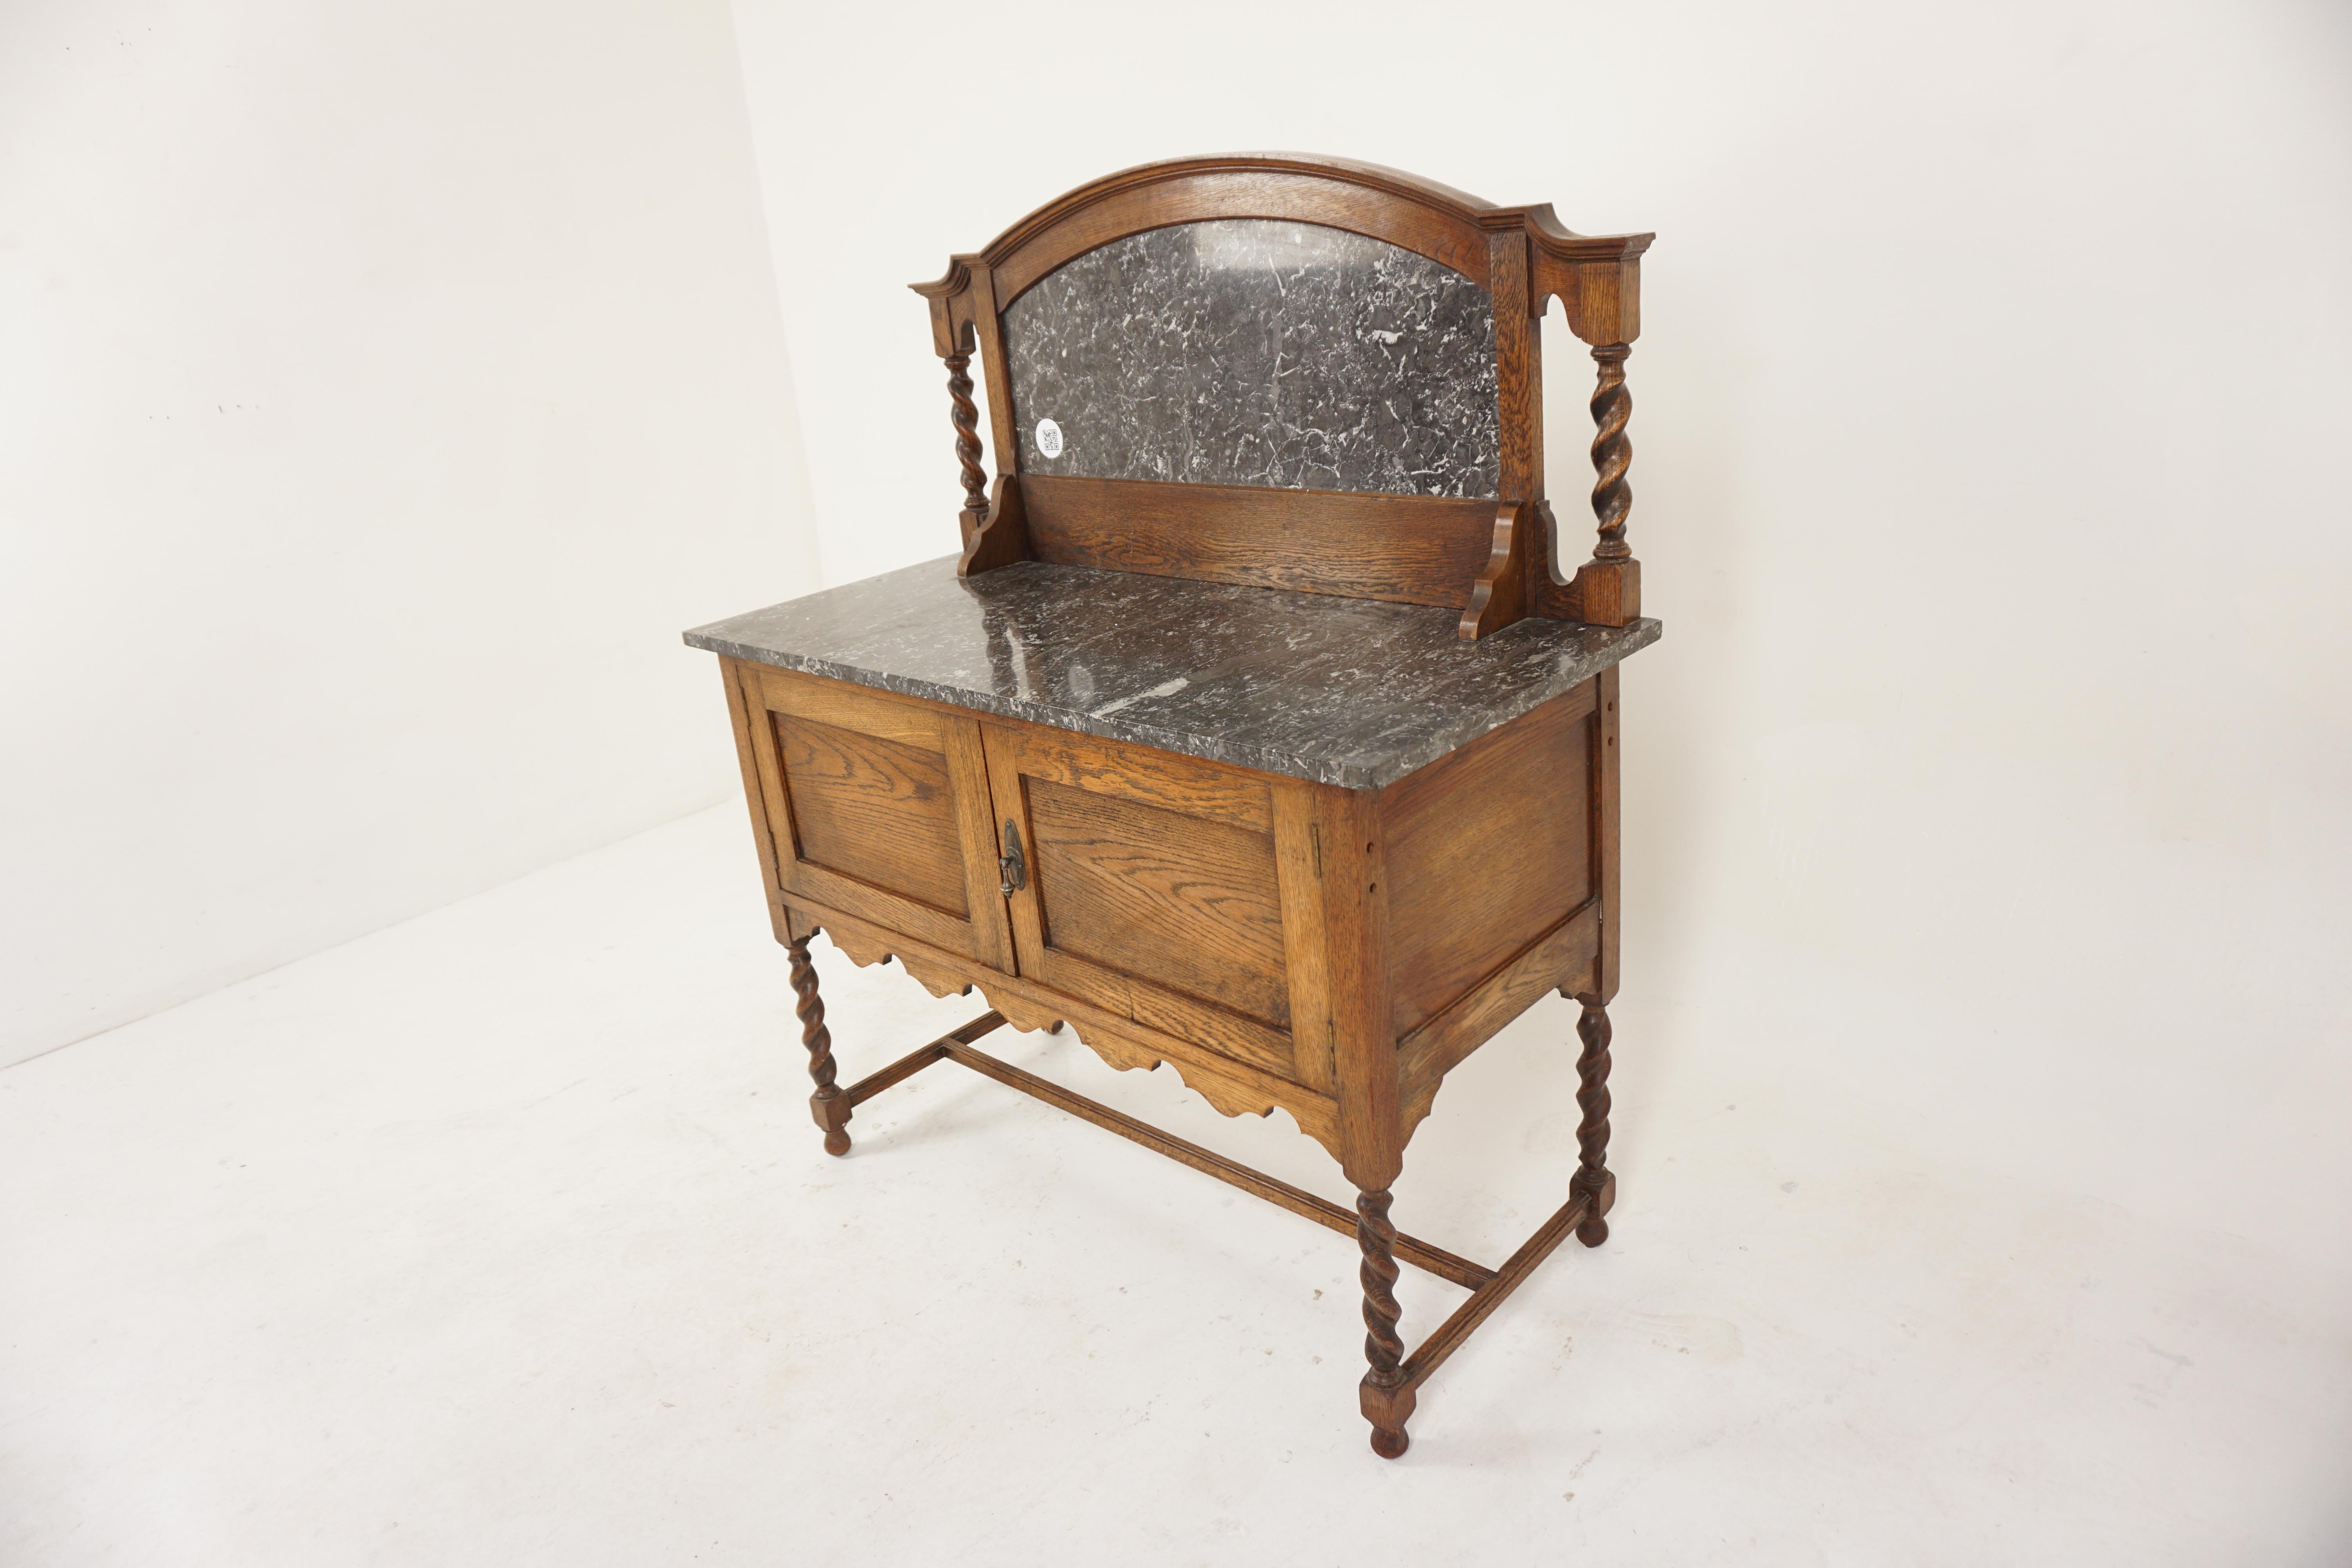 Arts + Crafts oak marble top barley twist washstand, Scotland 1910, H782.

Scotland 1910
Solid Oak
Original Finish
Attractive dome shaped back with barley twist supports on the ends.
Marble splash back.
Speckled grey and white marble